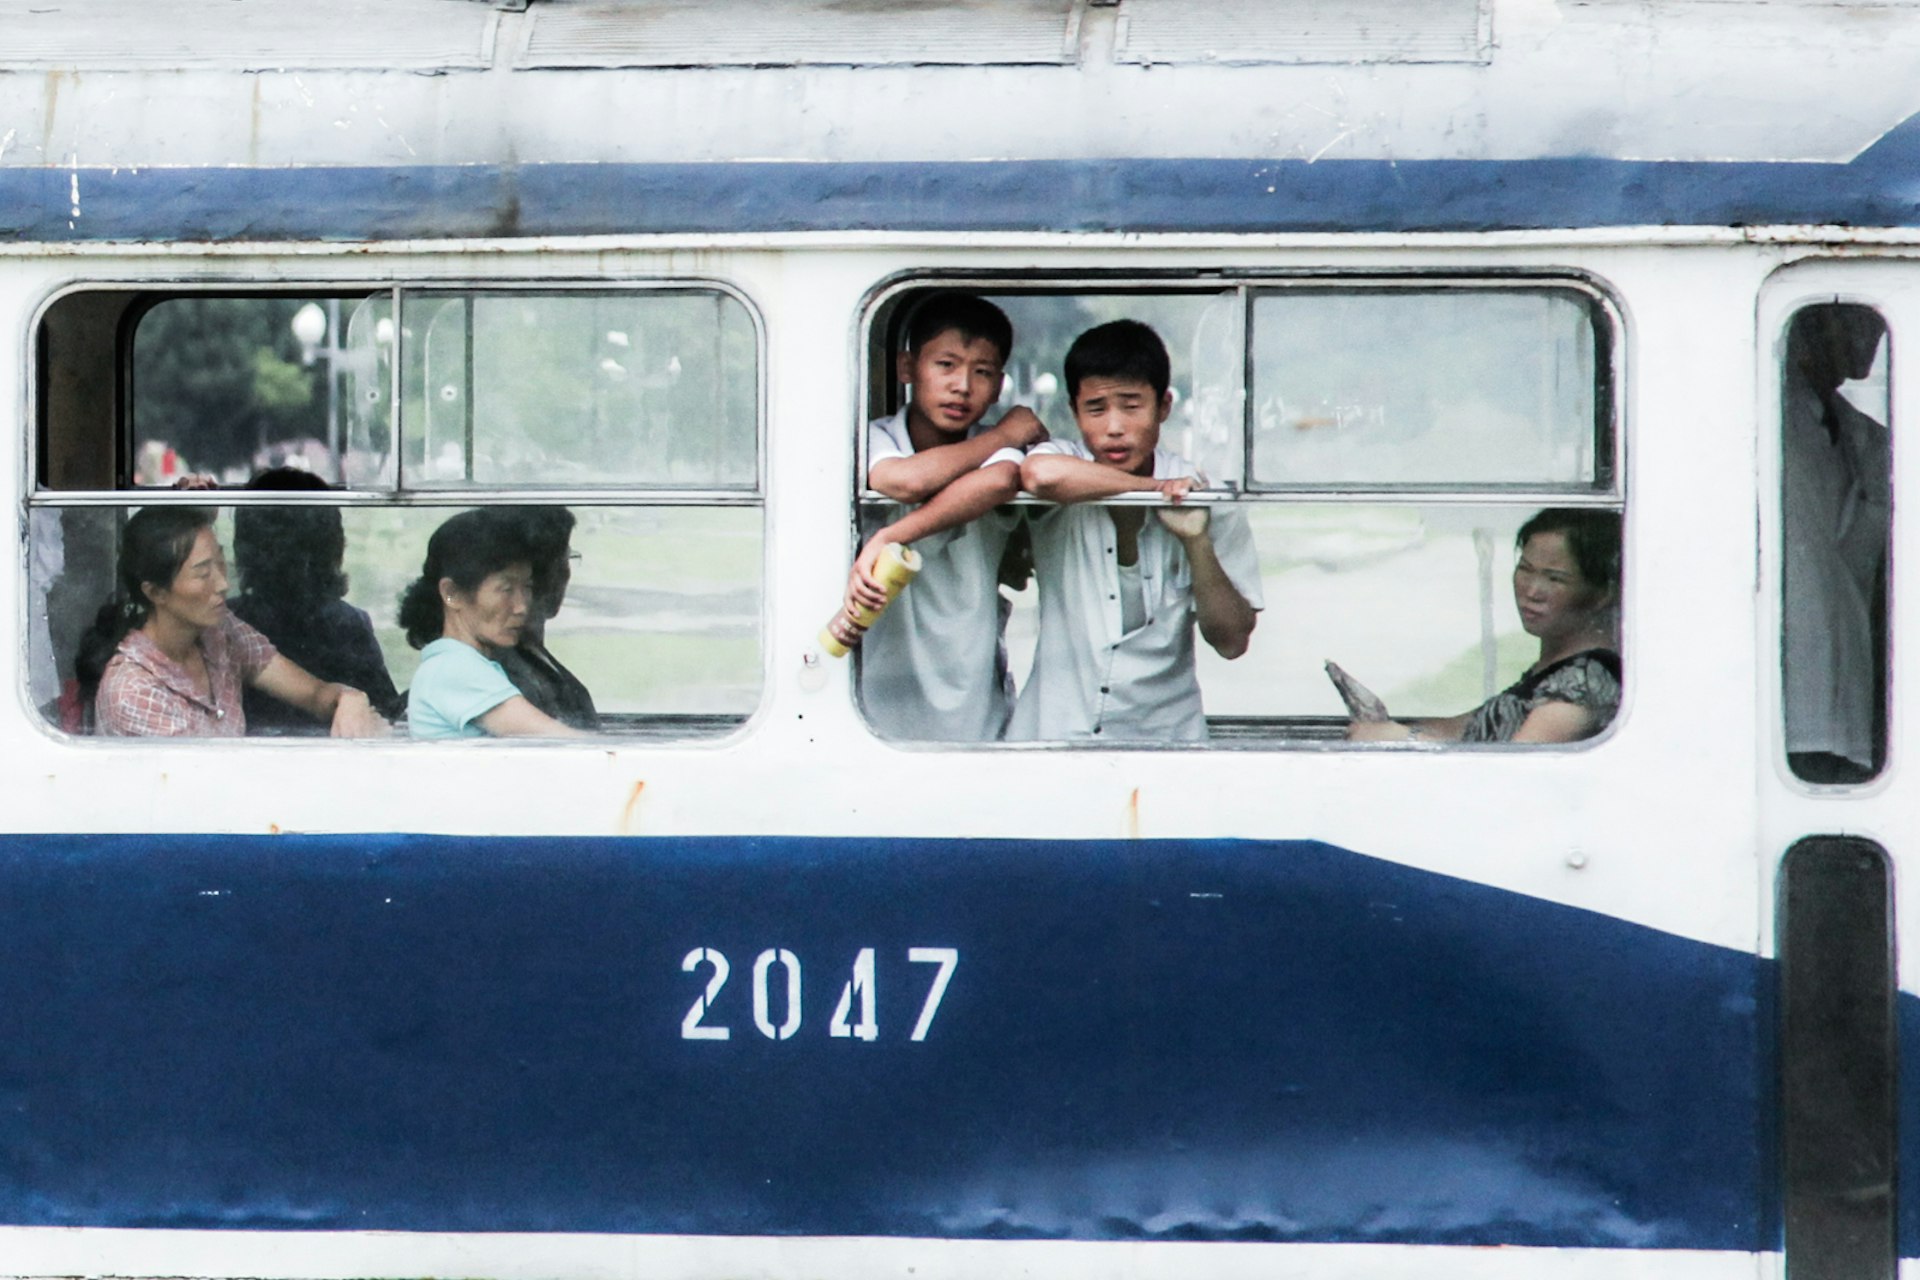 The Travel Diary: Documenting daily life in North Korea